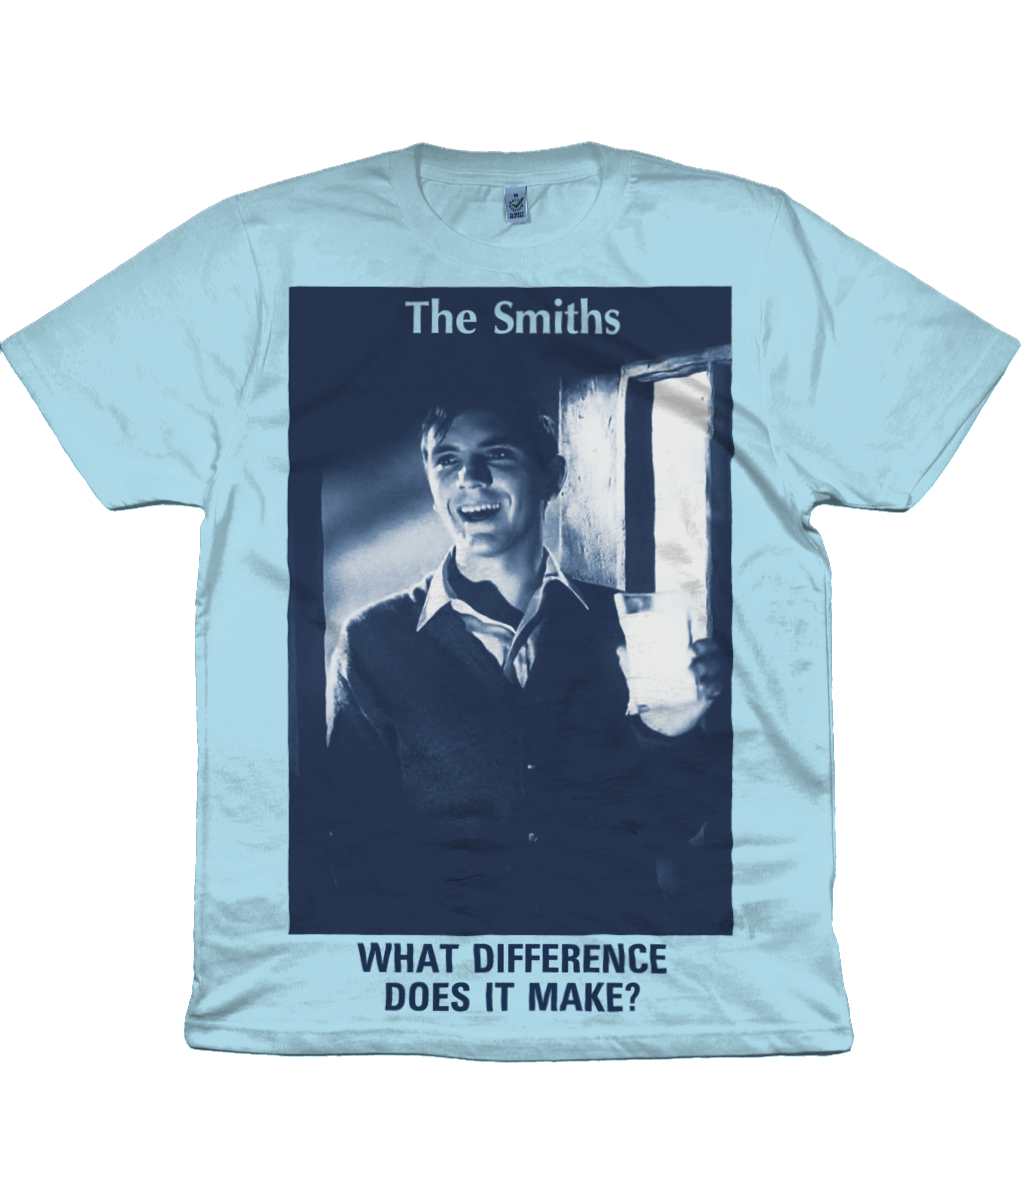 The Smiths - WHAT DIFFERENCE DOES IT MAKE? - 1984